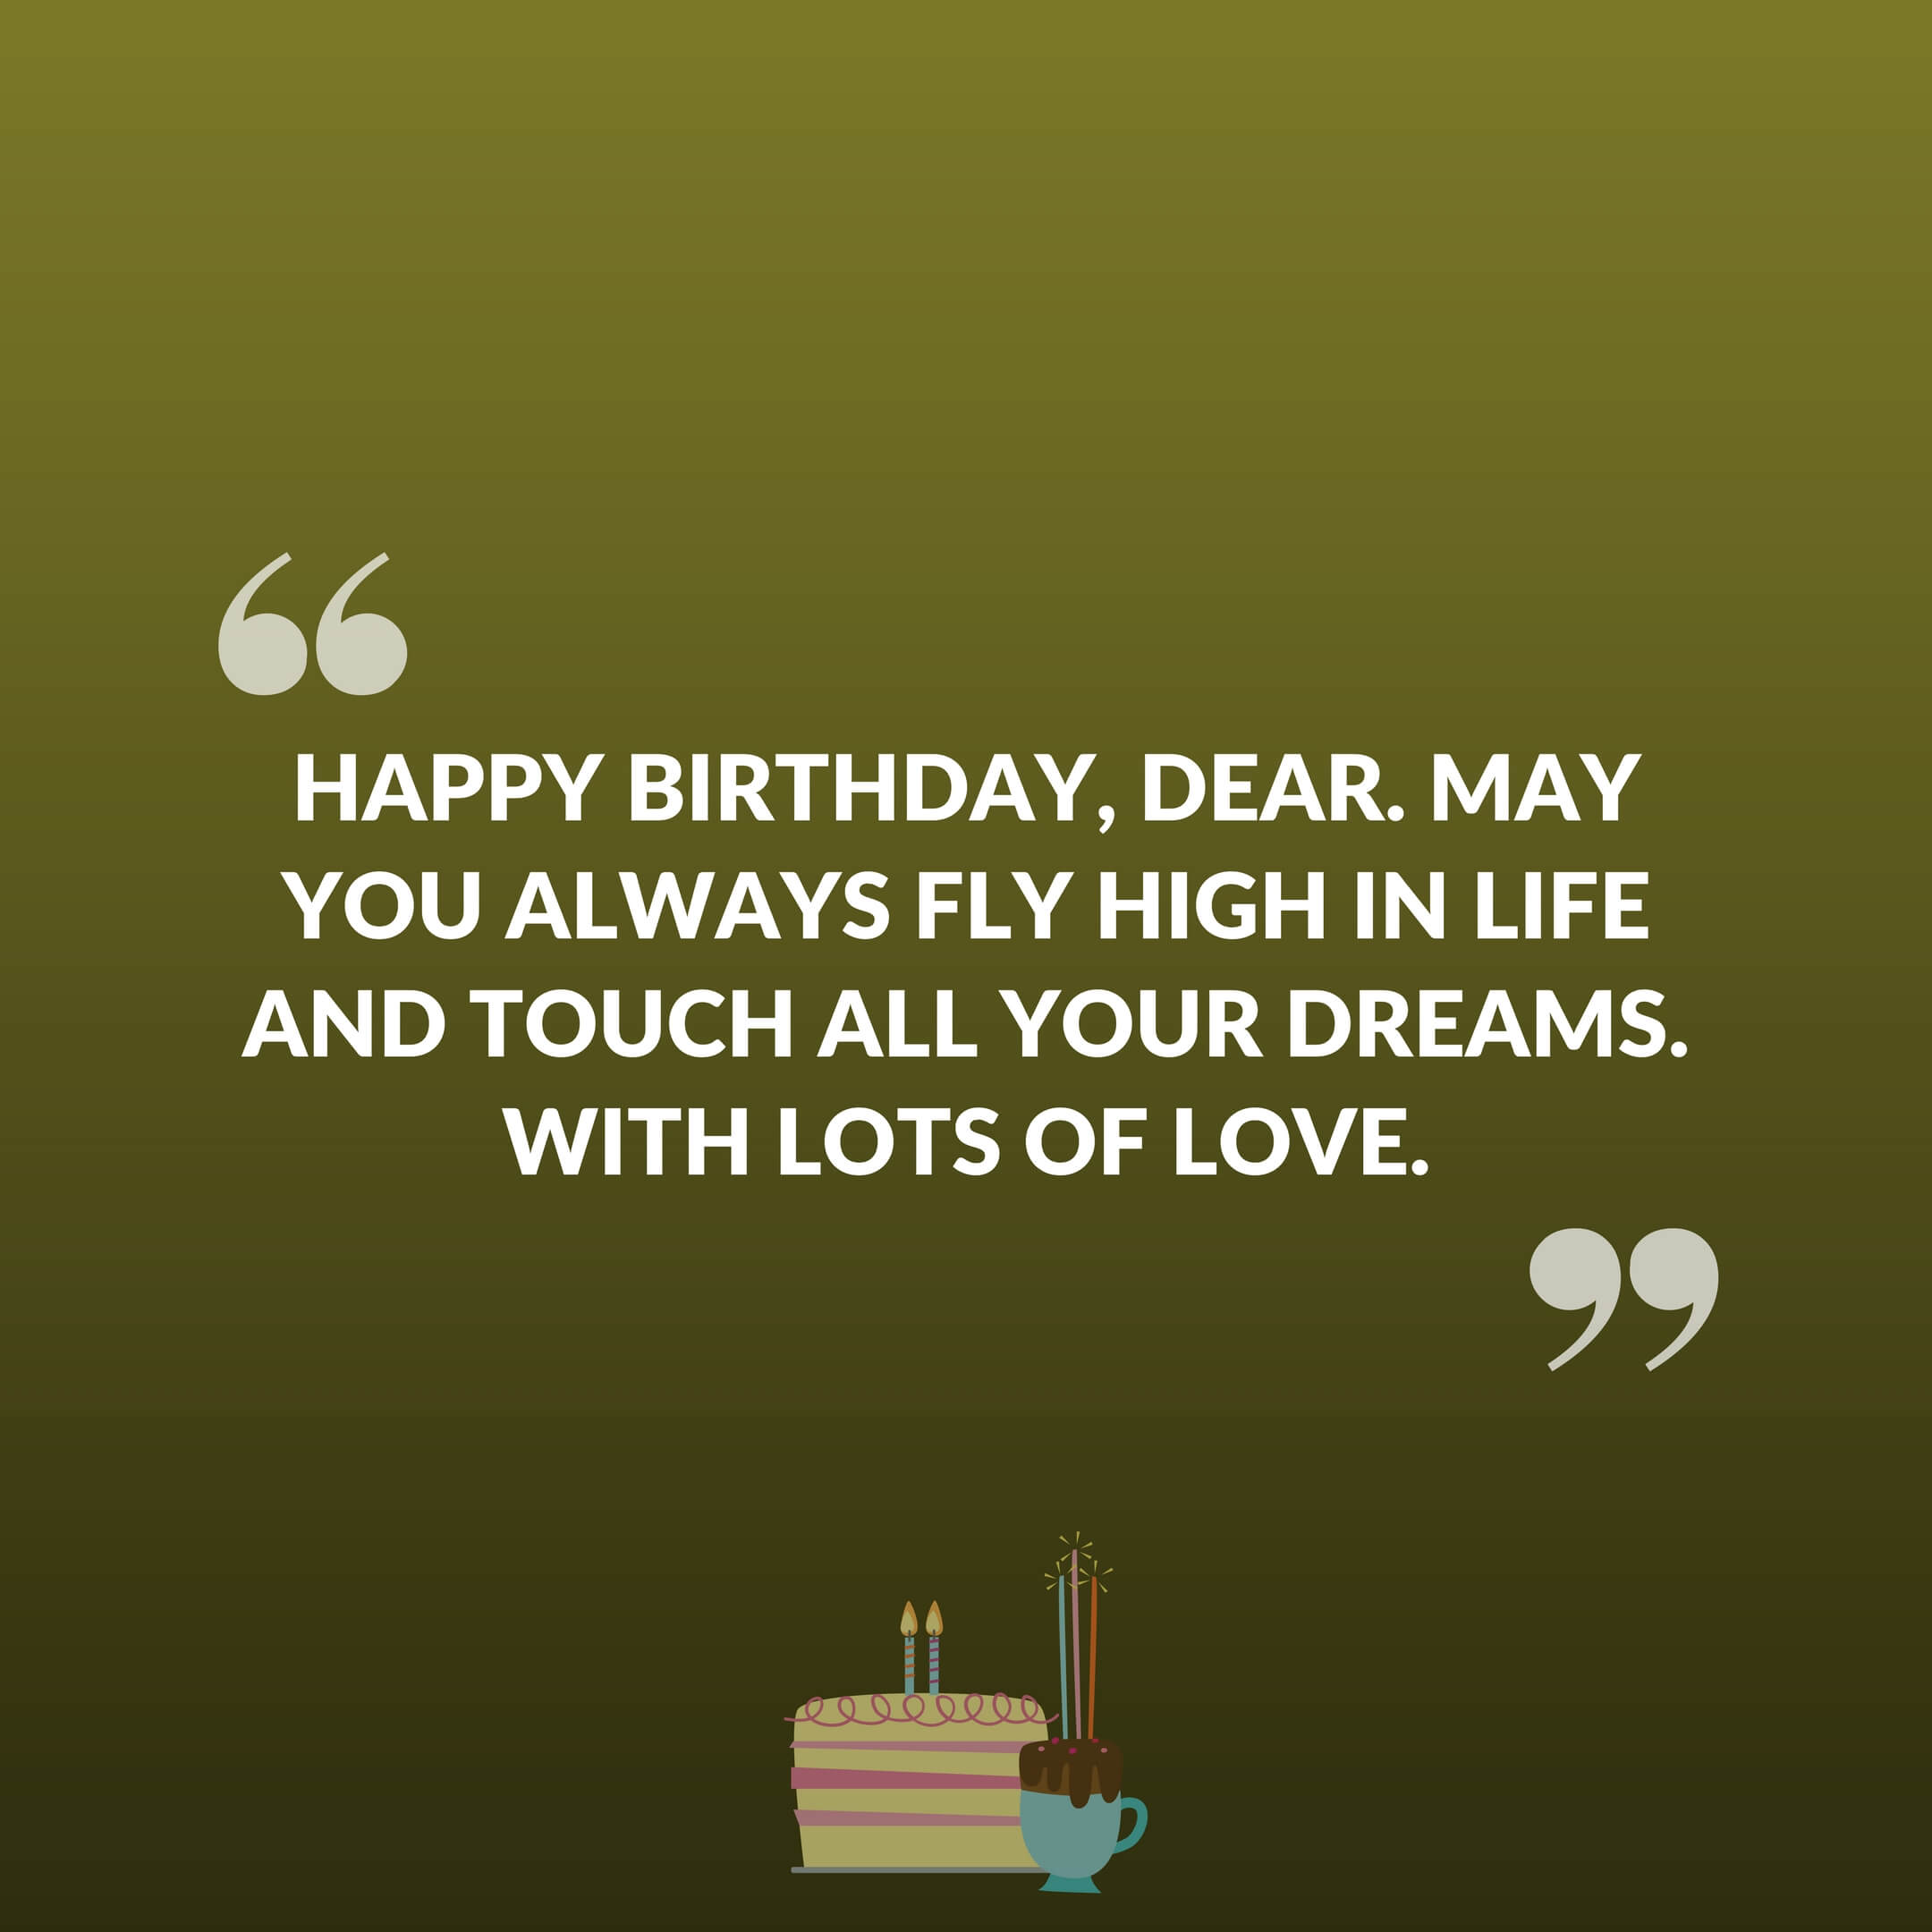 Happy Birthday, dear. May you always fly high in life and touch all your dreams. With lots of love.